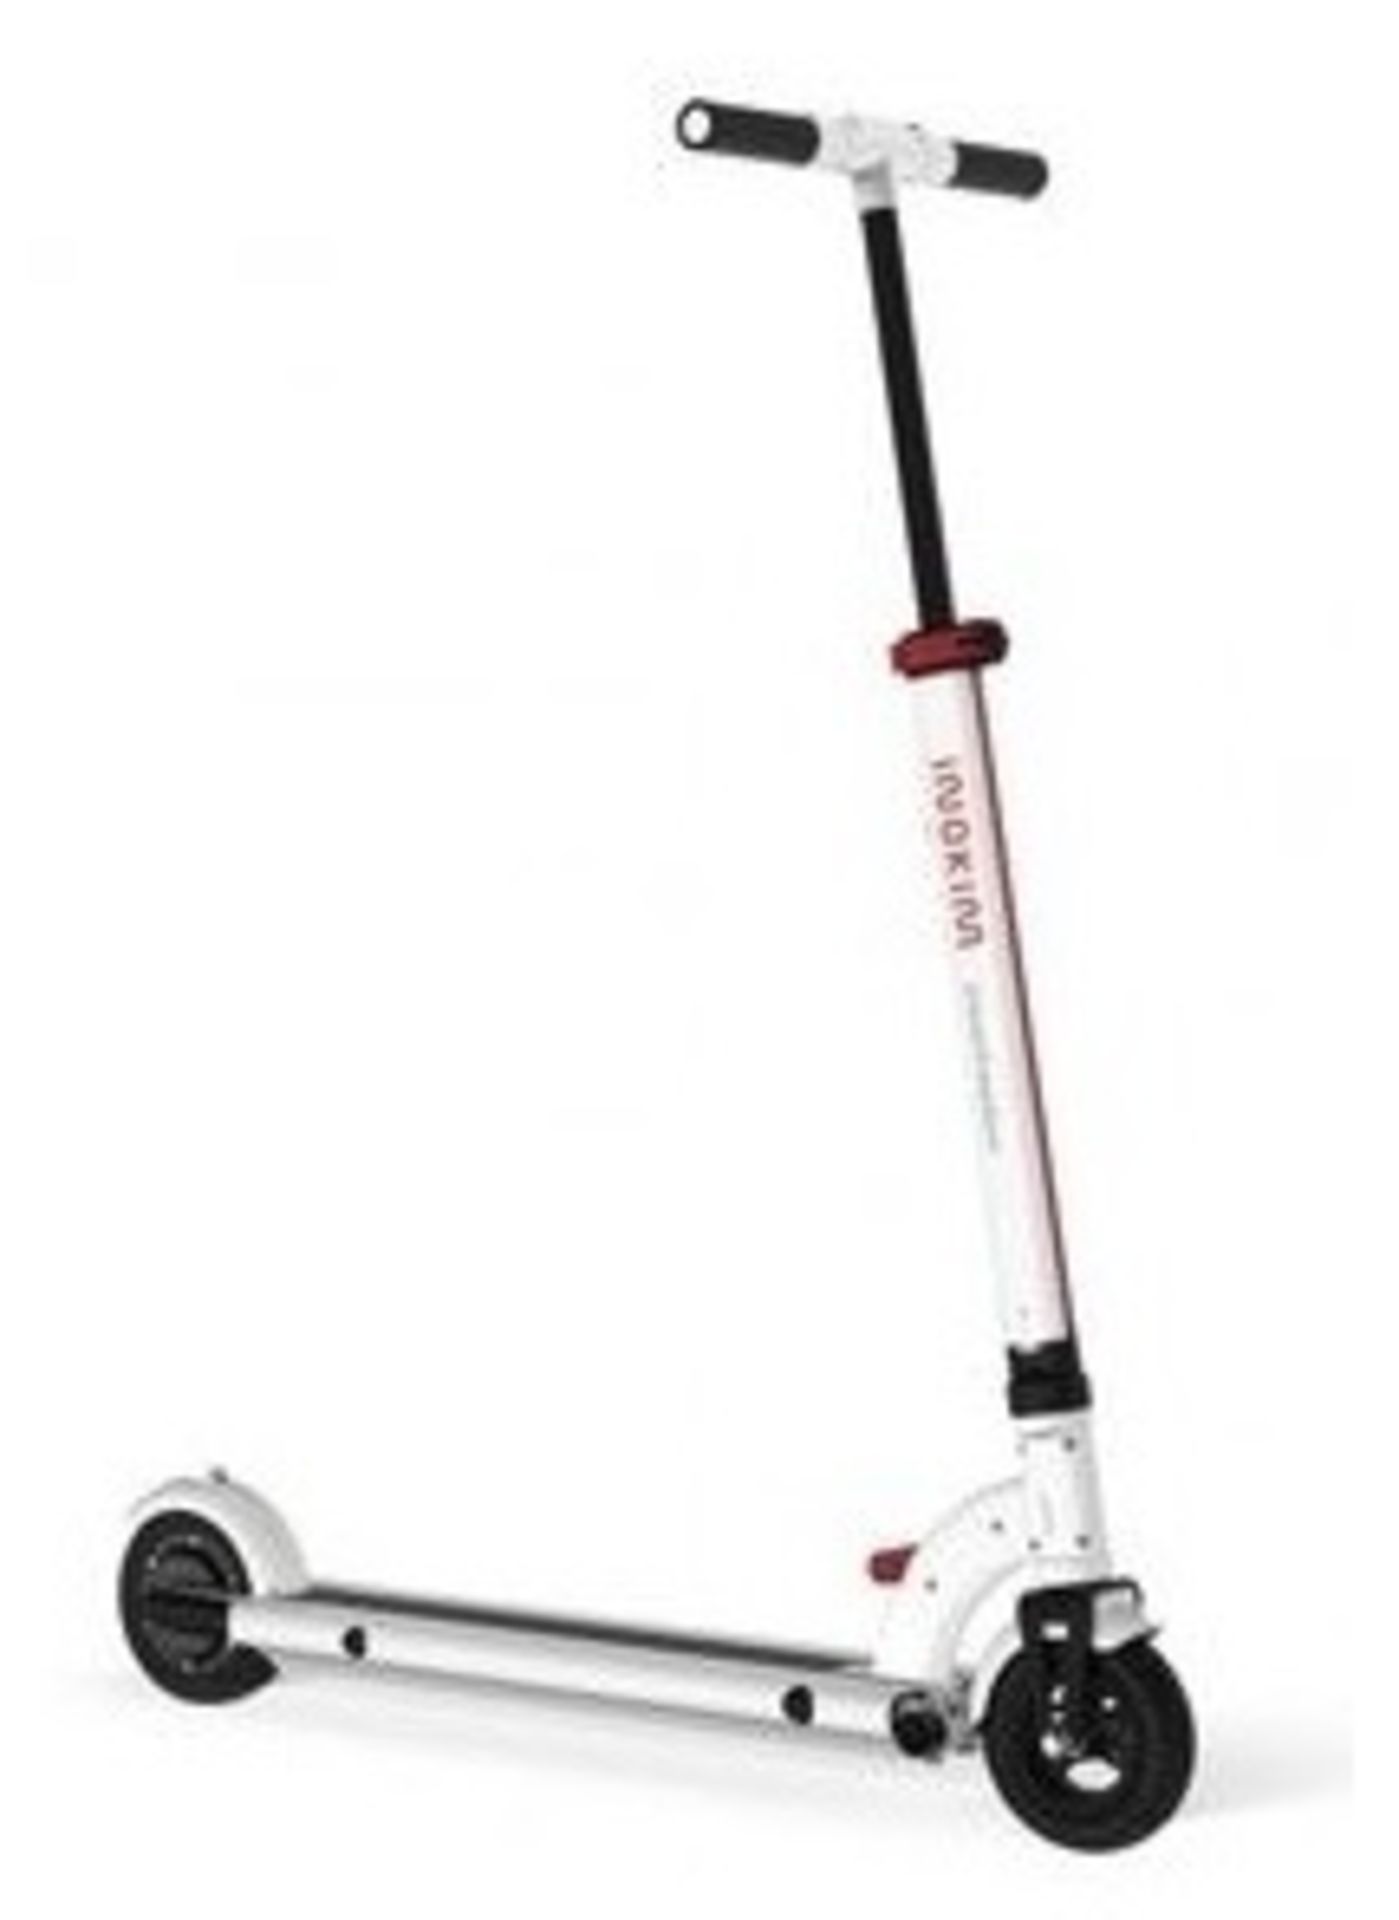 BRAND NEW NOKIM MINI FORCE BLACK 1'SELECTRIC SCOOTER (BLACK) RRP £559 - Image 4 of 4